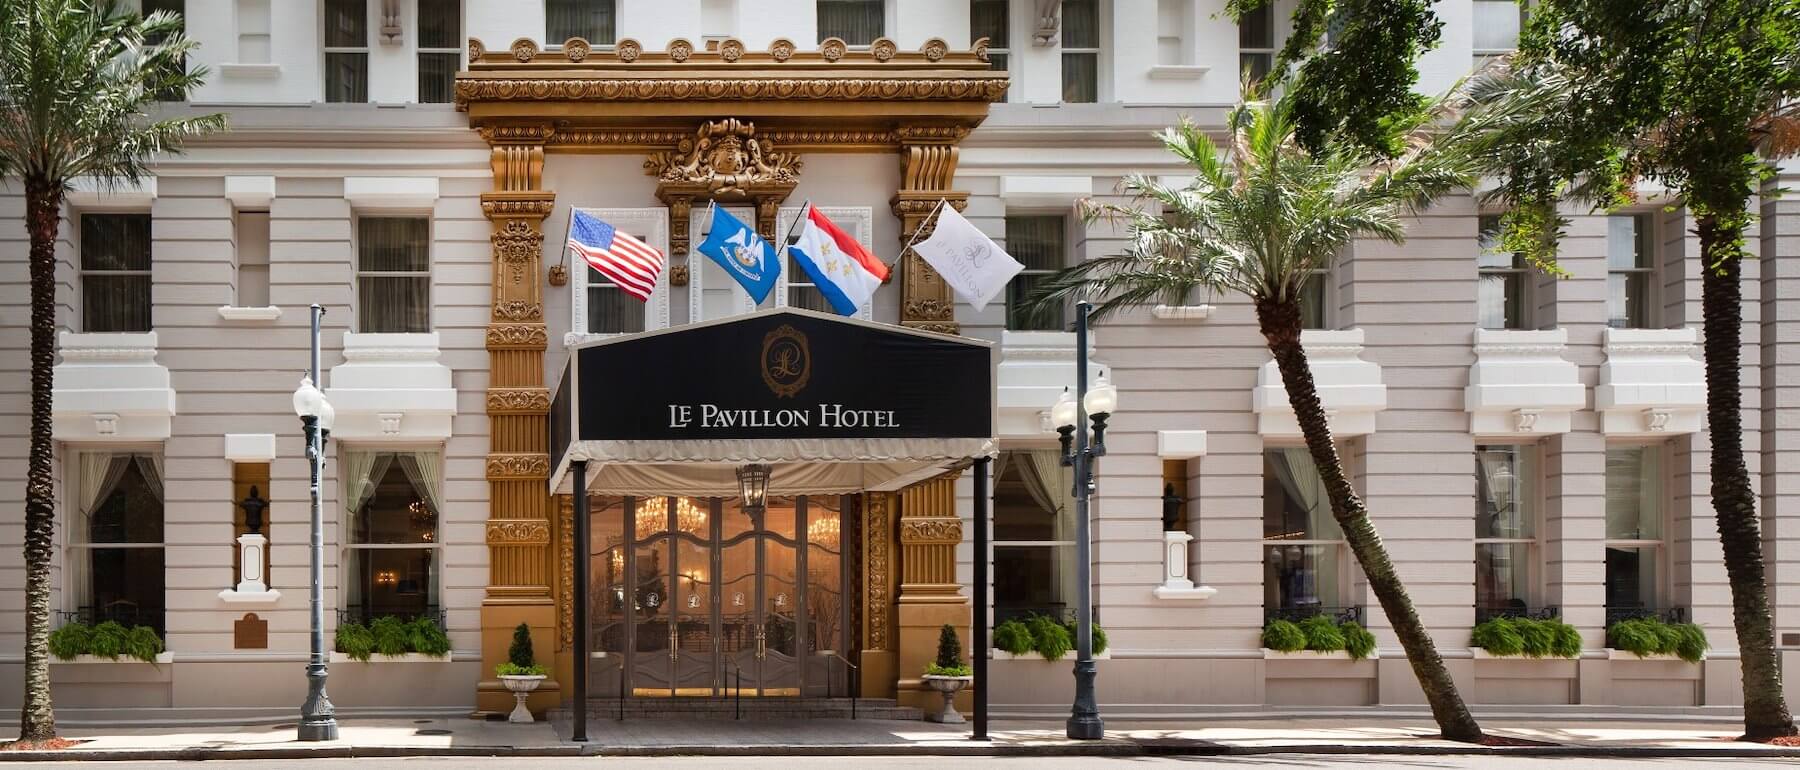 Le Pavillon: A New Kind of Luxury Hotel in Downtown New Orleans